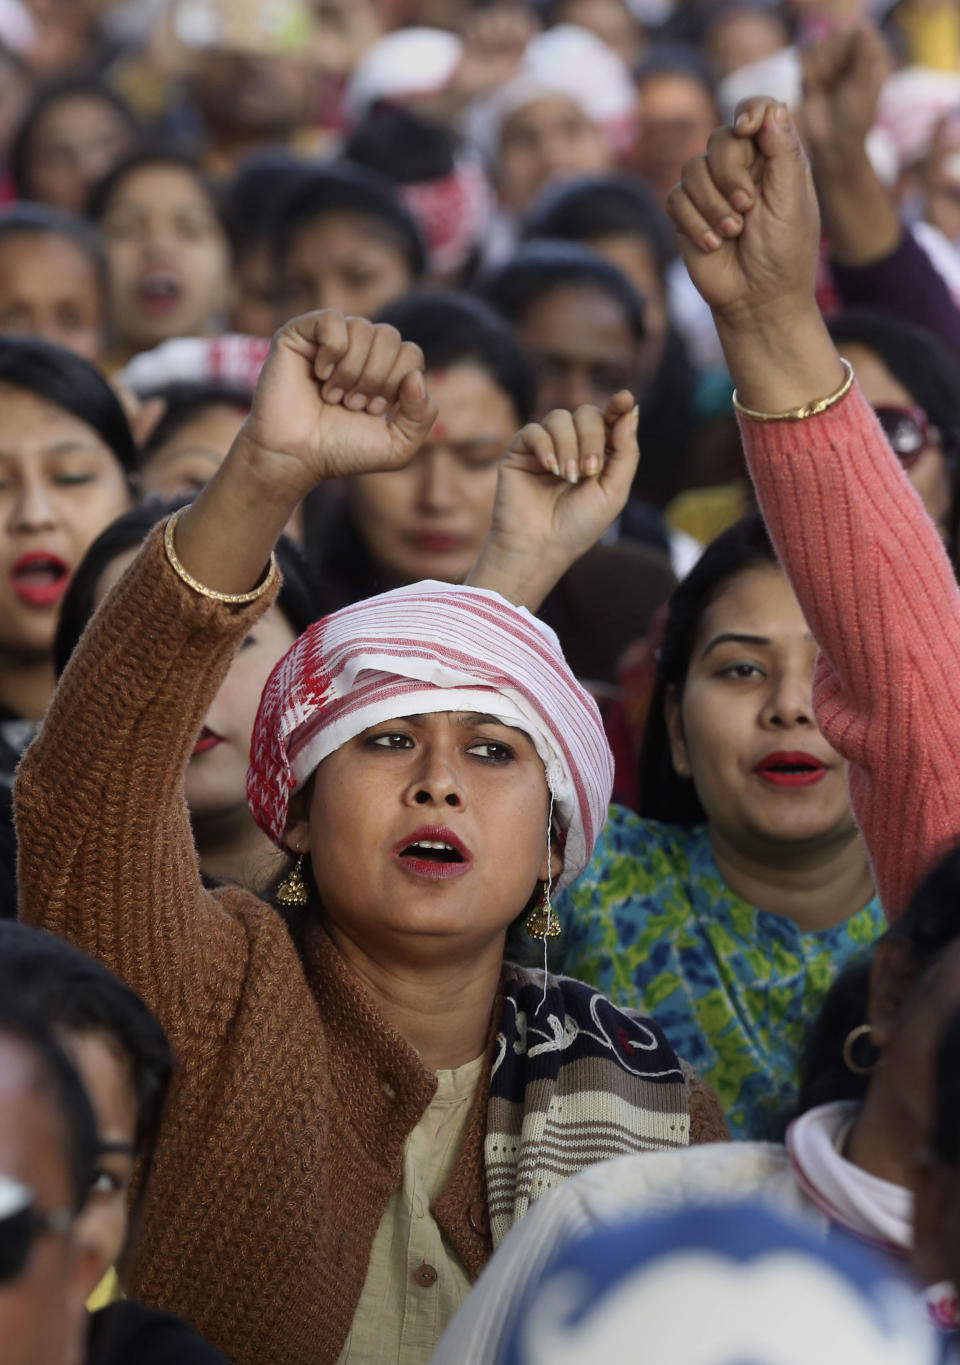 Indians shout slogans during a protest against the Citizenship Amendment Act in Nalbari, India, Friday, Dec. 20, 2019. Police banned public gatherings in parts of the Indian capital and other cities for a third day Friday and cut internet services to try to stop growing protests against a new citizenship law that have left more than 10 people dead and more than 4,000 others detained. (AP Photo/Anupam Nath)